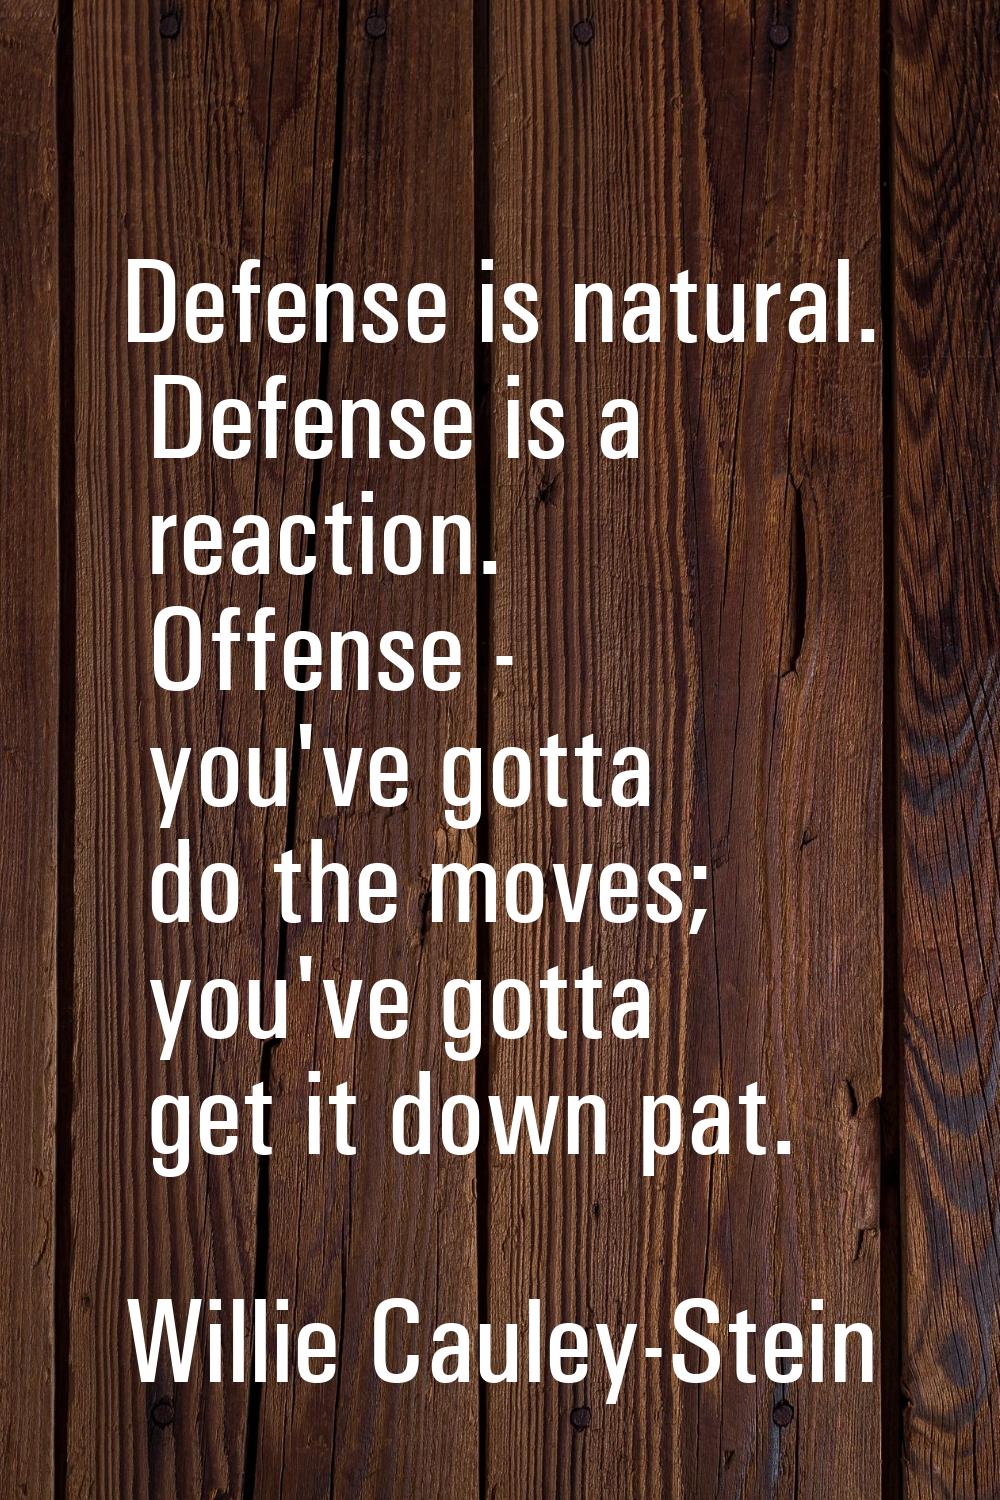 Defense is natural. Defense is a reaction. Offense - you've gotta do the moves; you've gotta get it